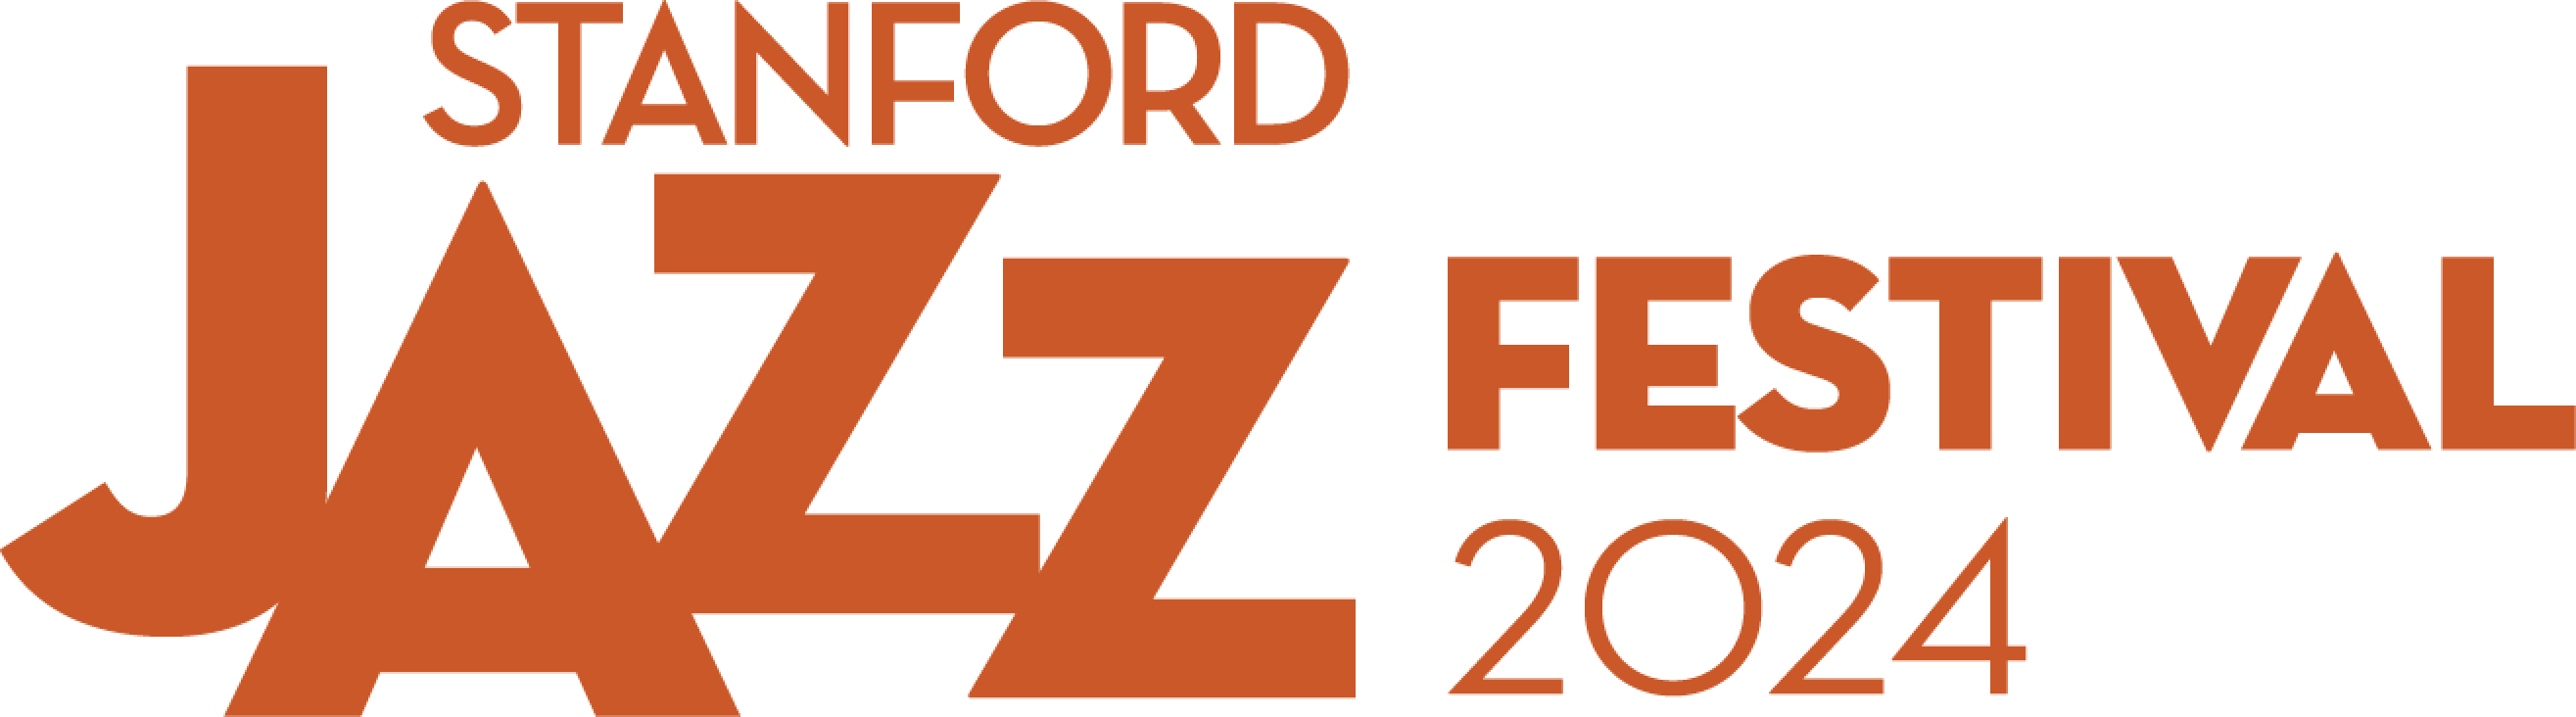 52nd Annual Stanford Jazz Festival Presents 30 Concerts at Four Iconic Stanford Venues